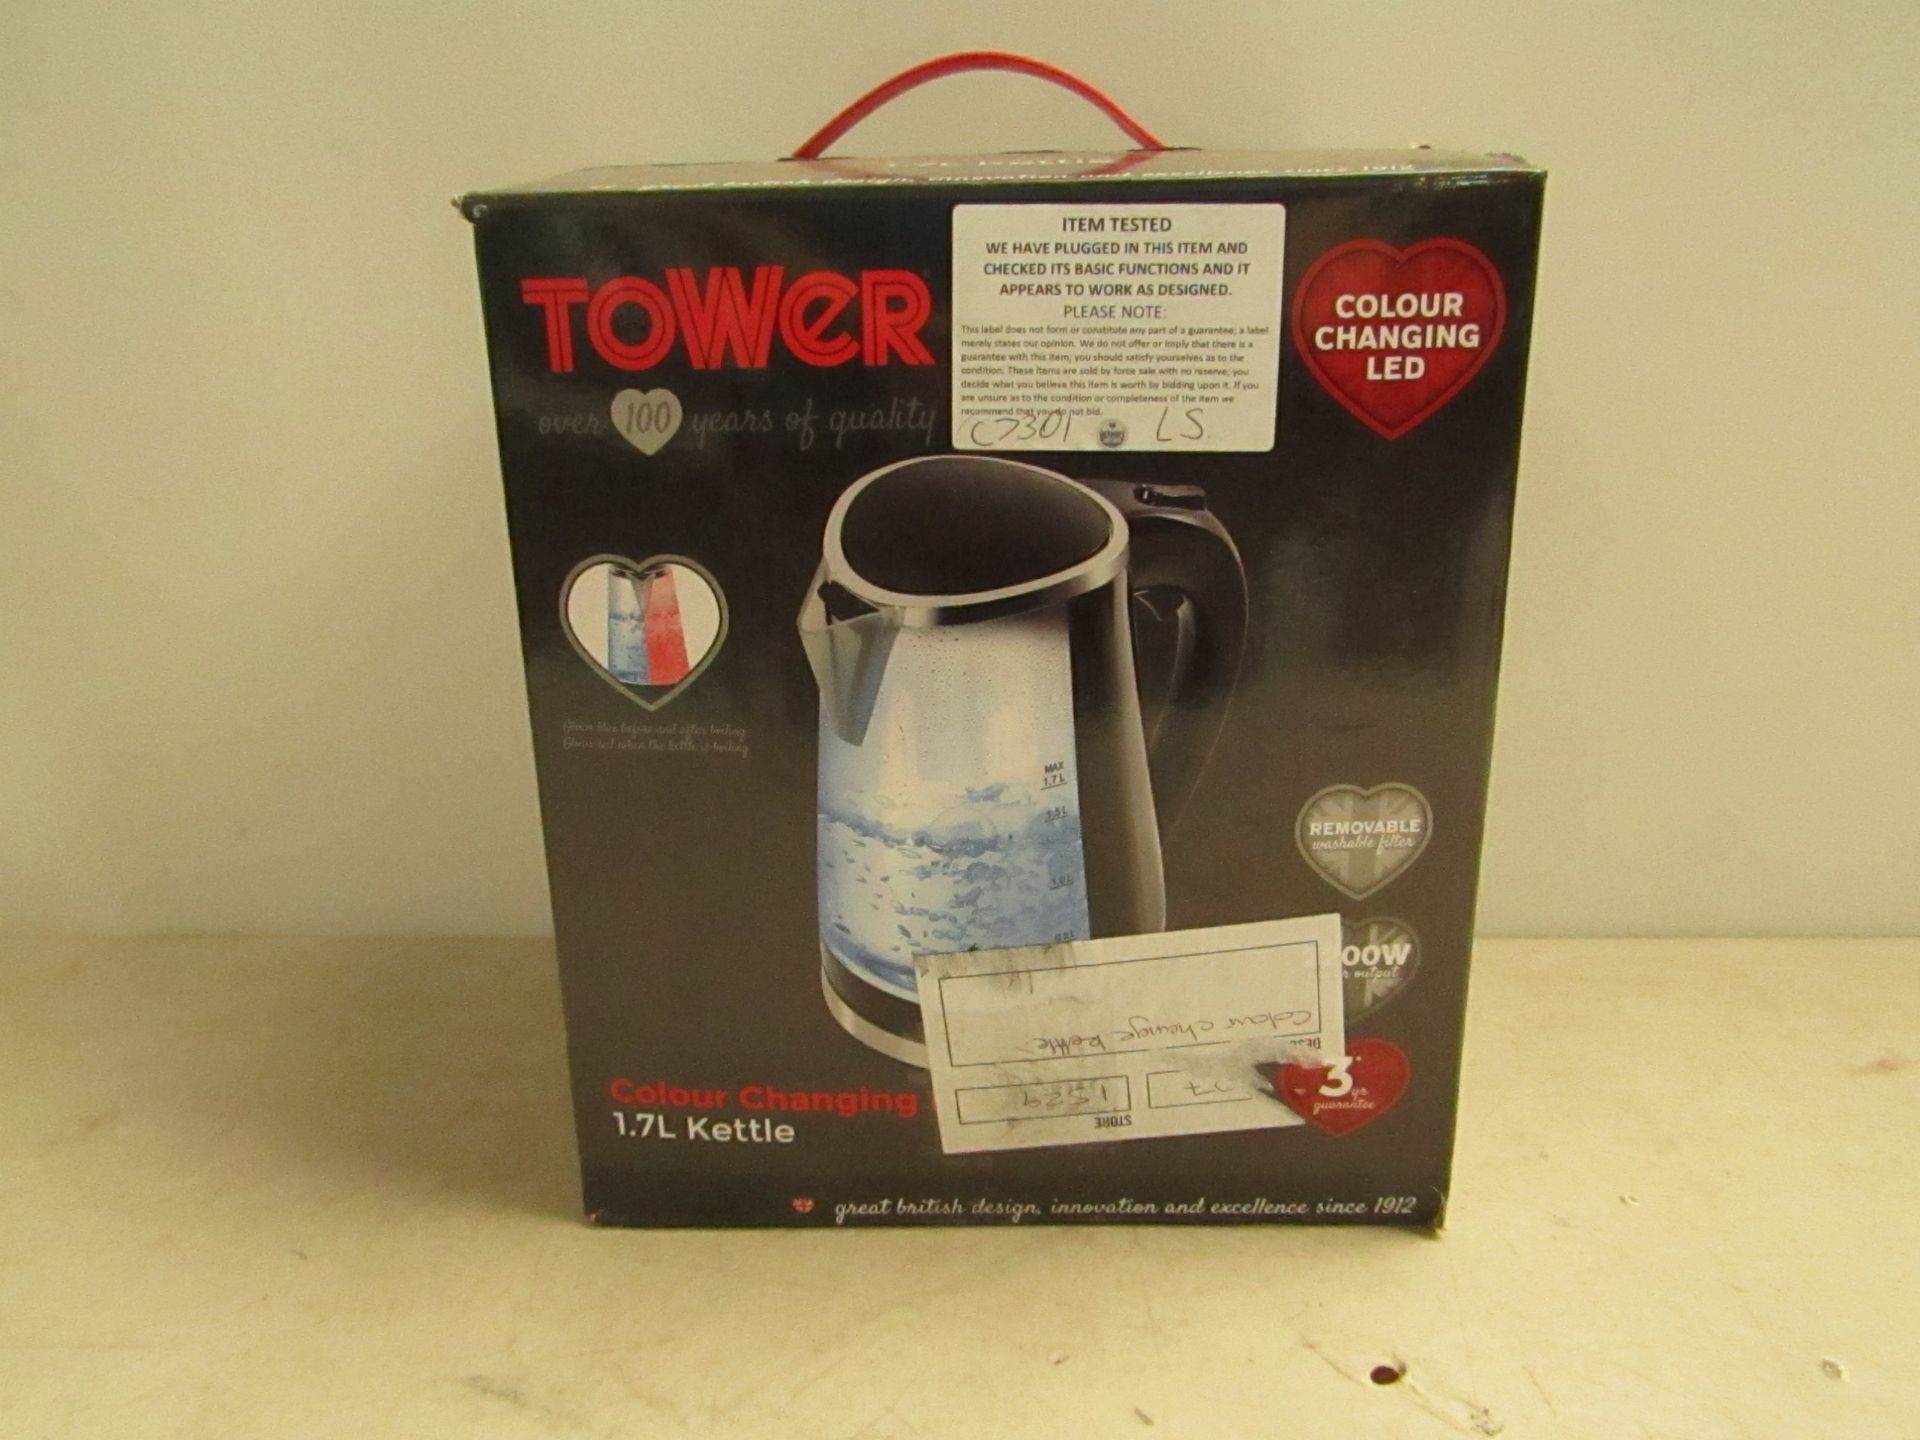 Tower colour changing 1.7L kettle, tested working and boxed.